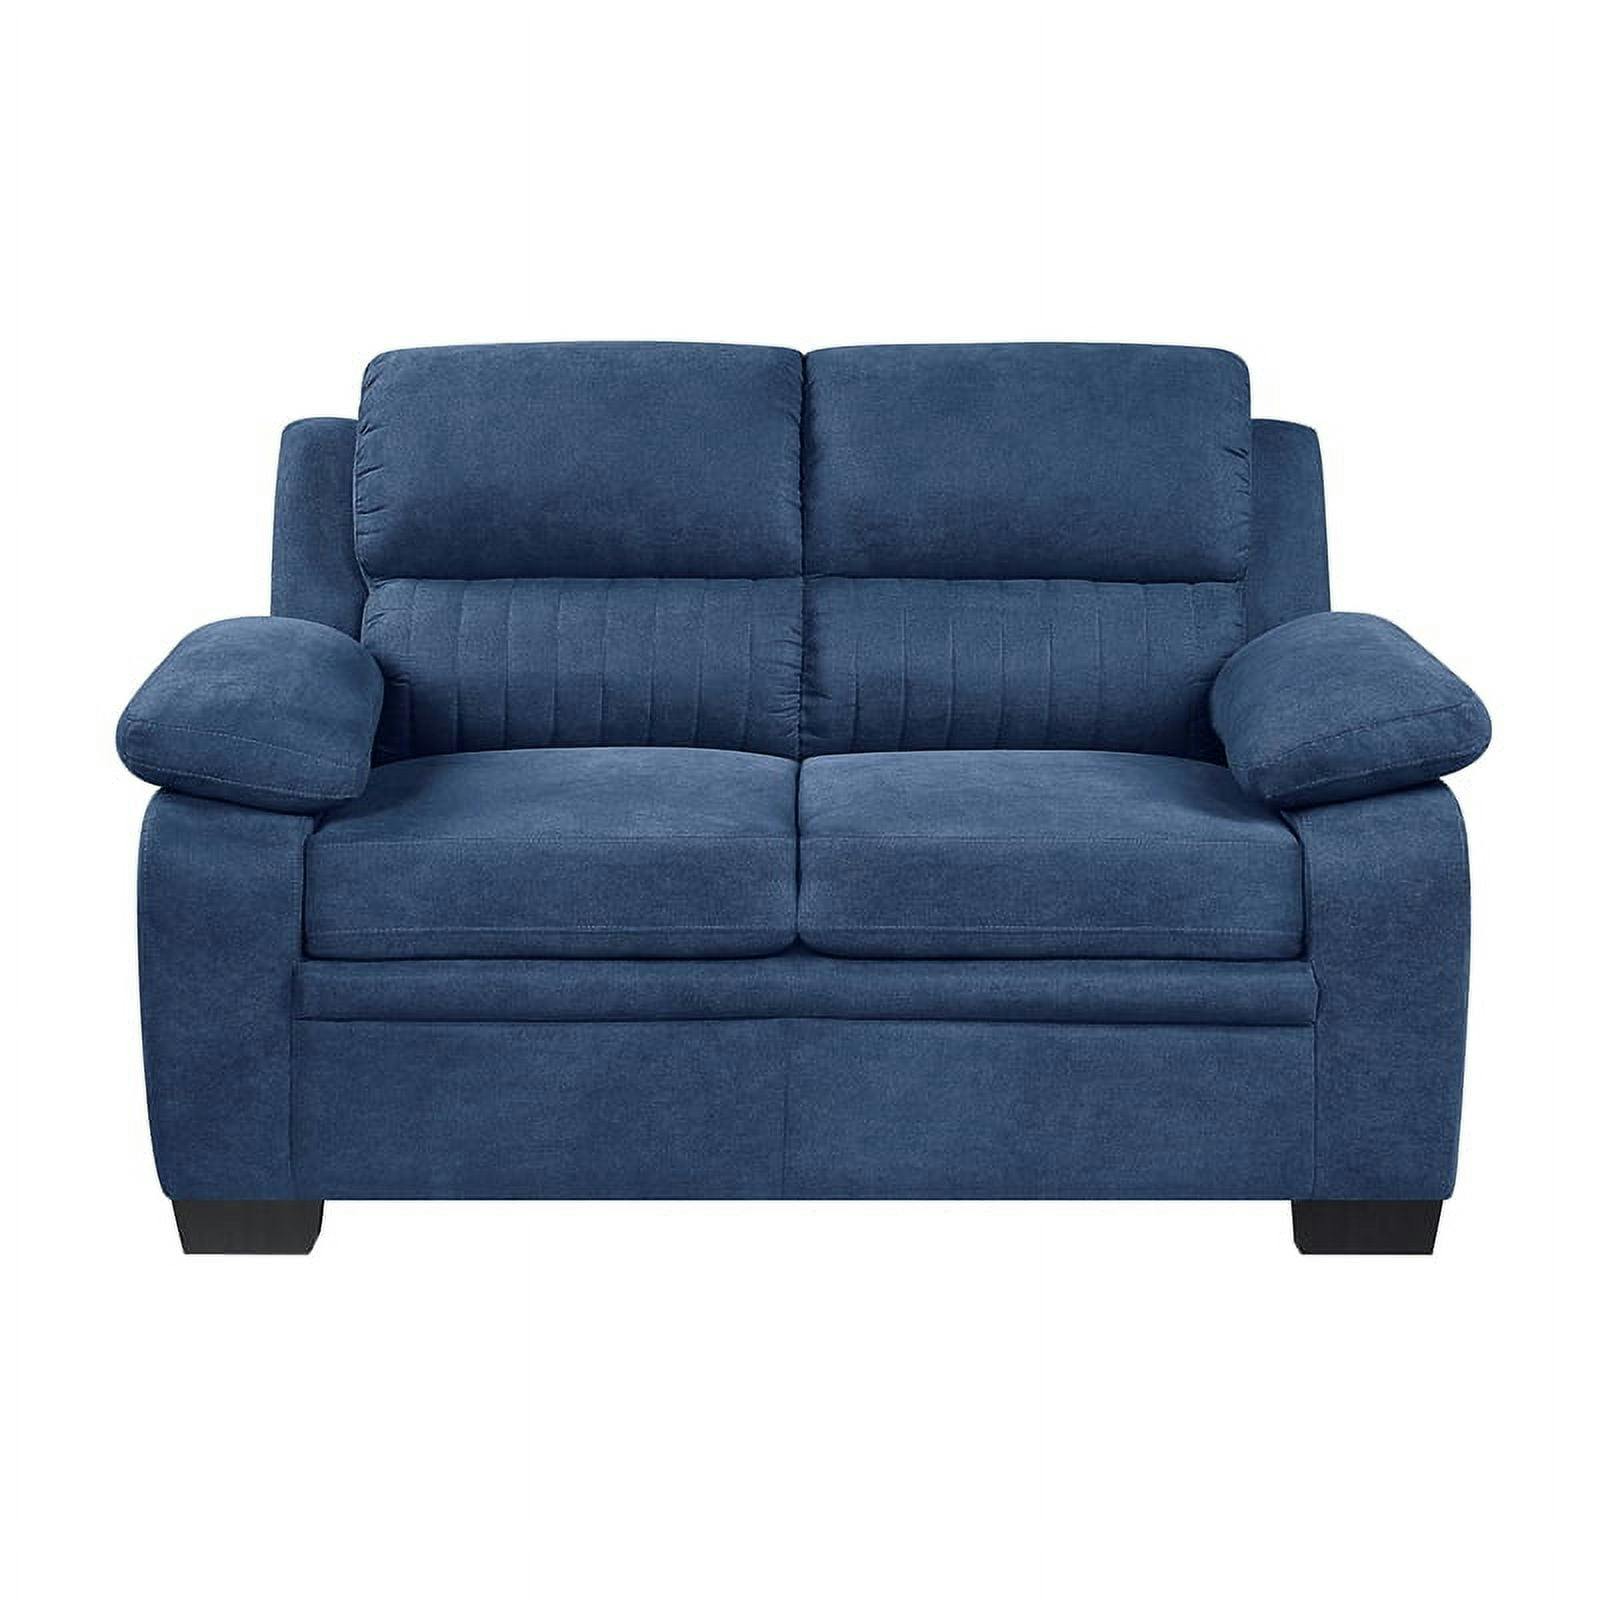 Holleman Plush Blue Fabric Loveseat with Pillow-Top Arms and Wood Frame